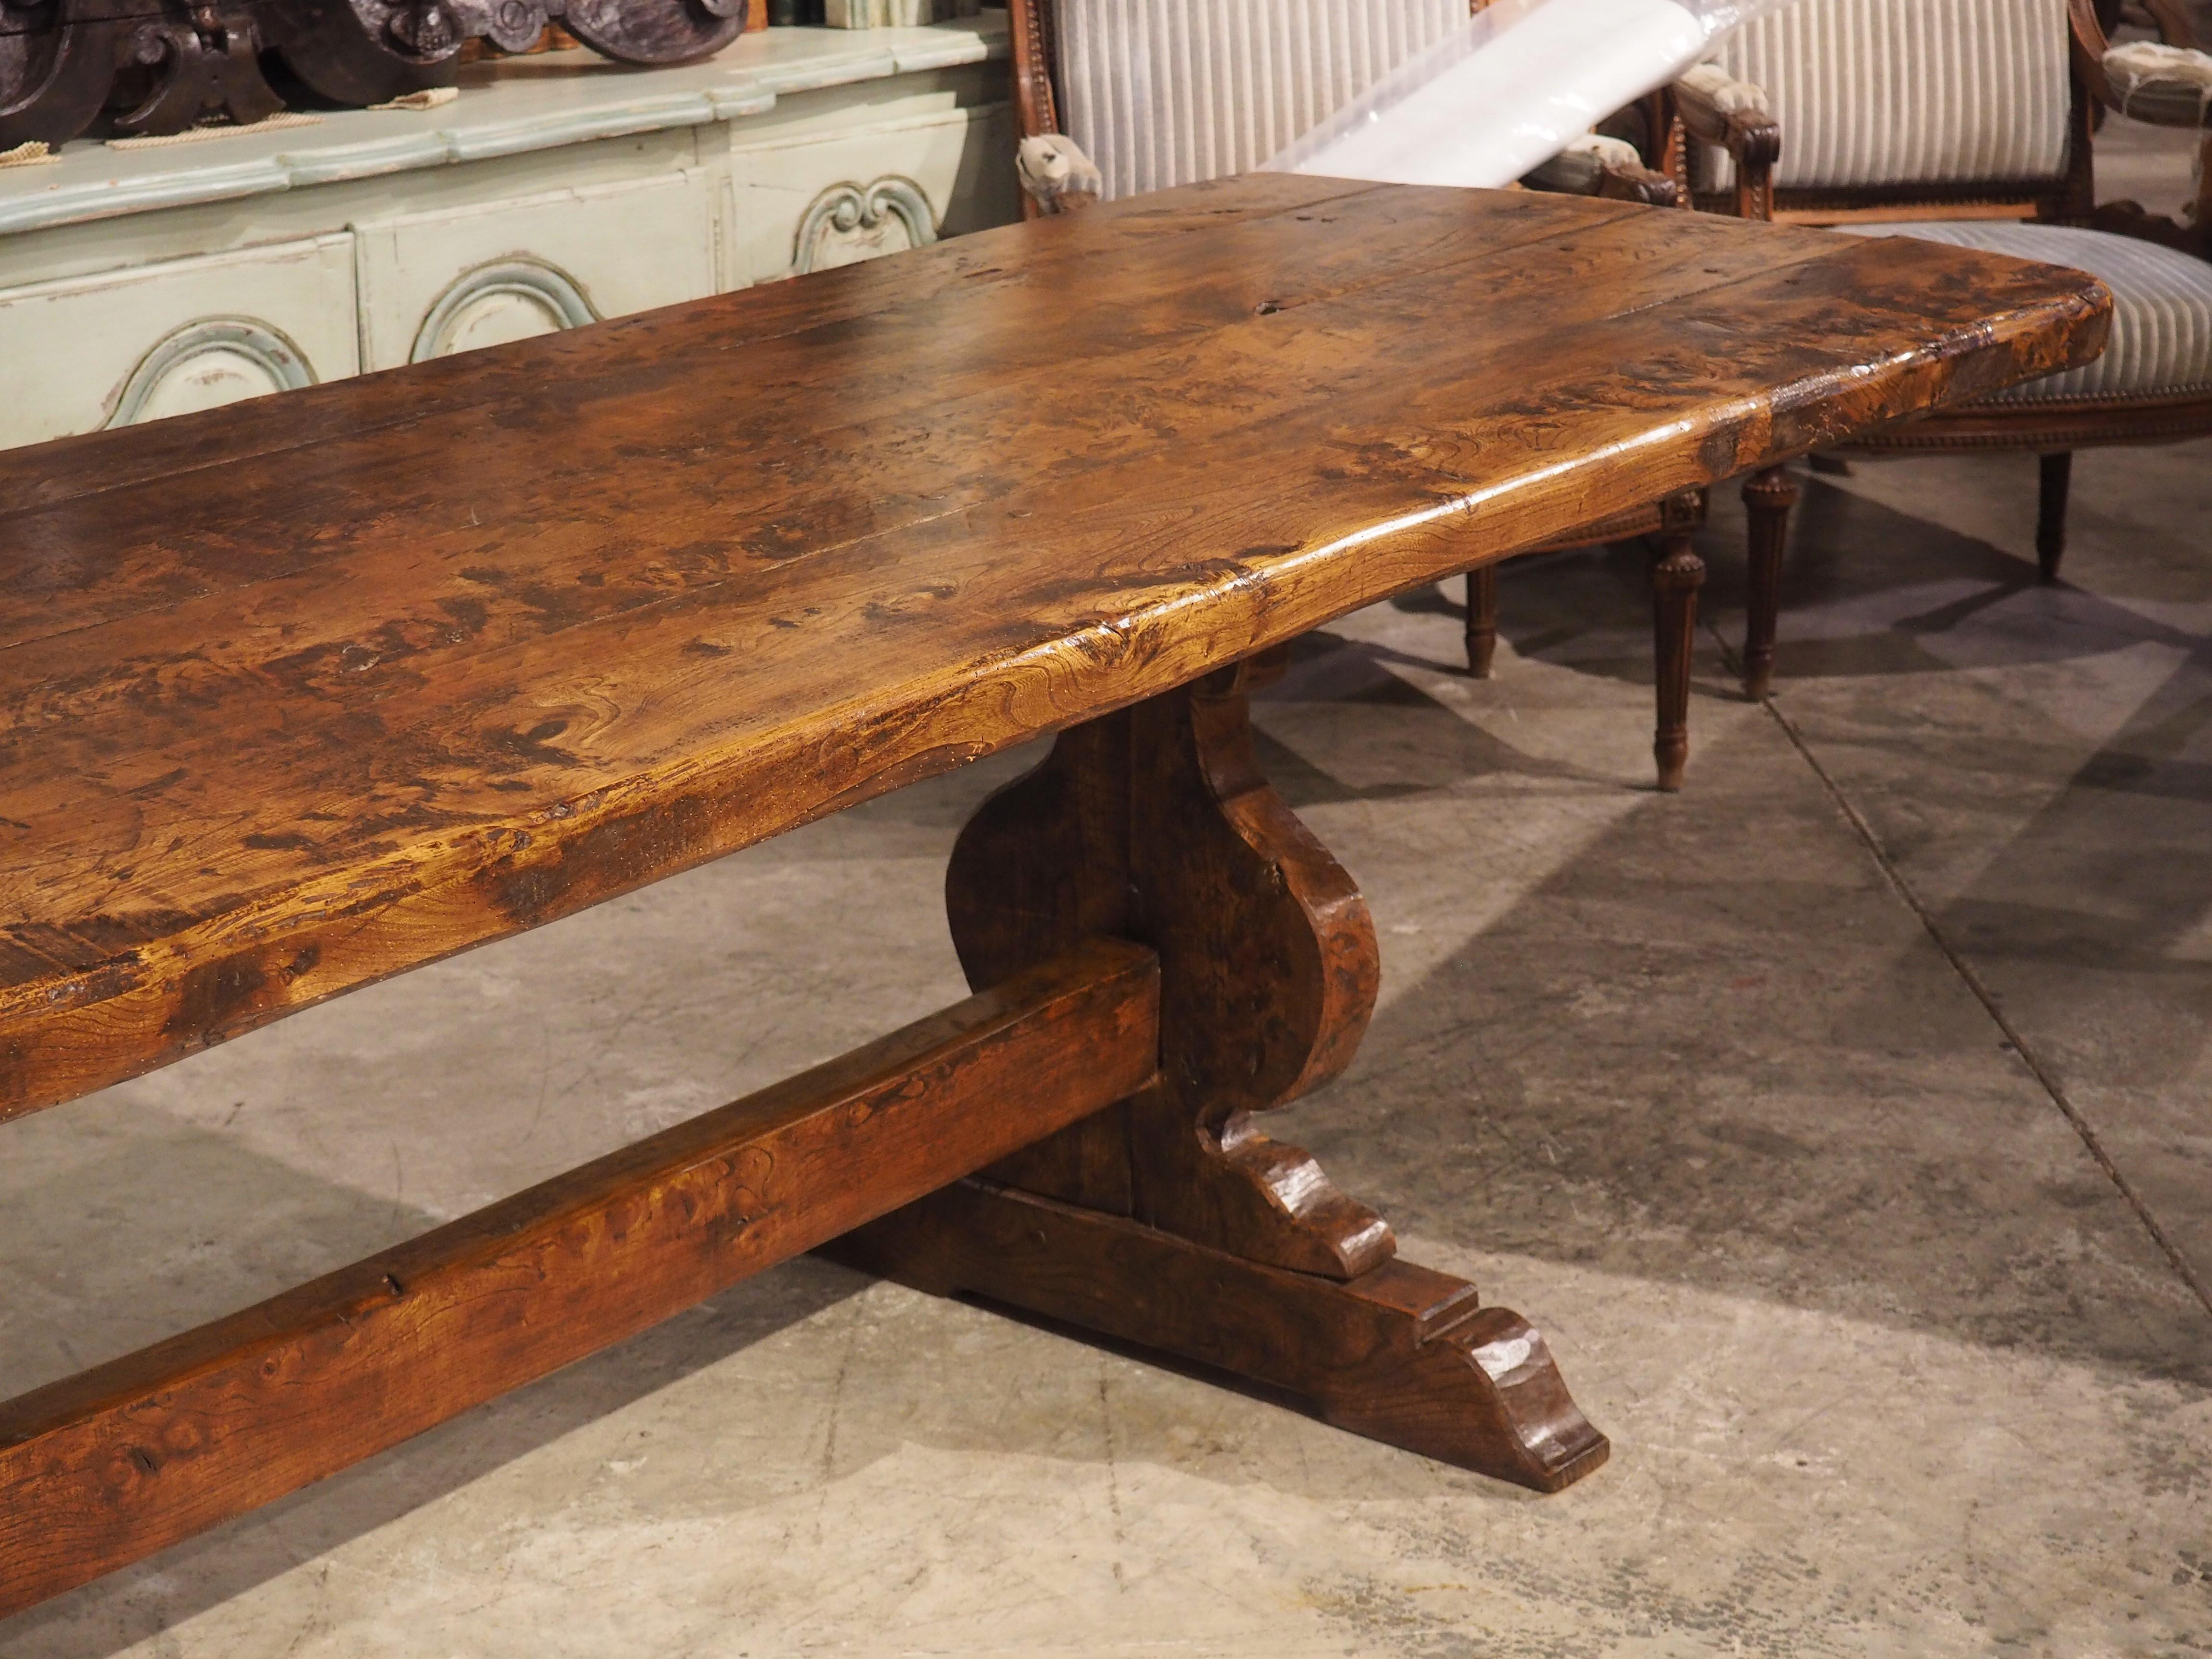 Antique Chestnut Dining Table from a Chateau, Coat Nizan, Brittany 1